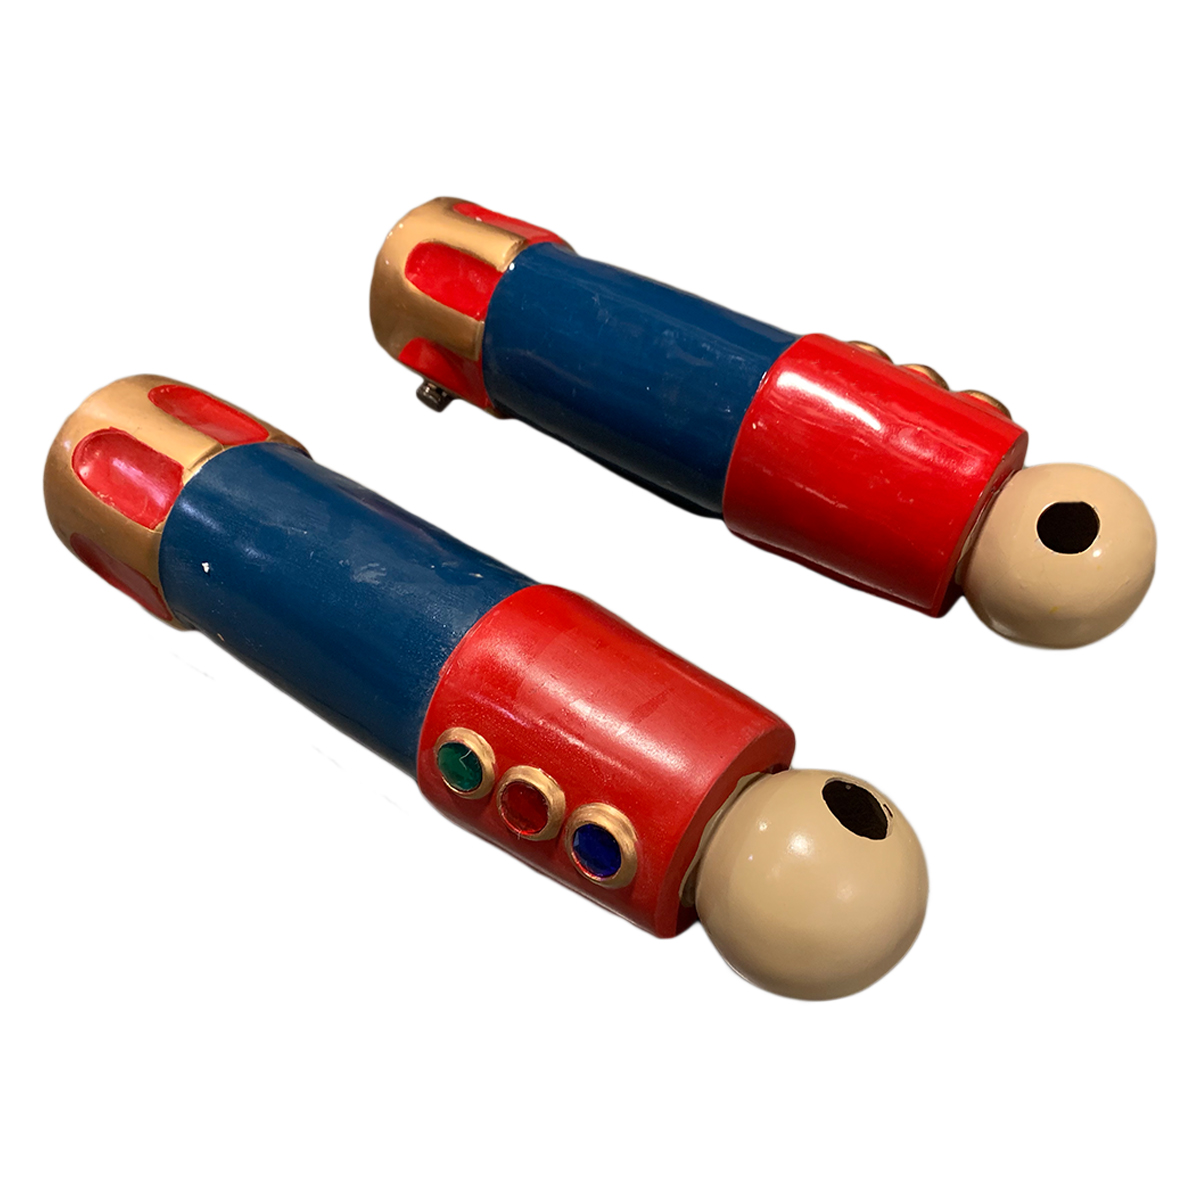 Replacement Pair of Arms for Toy Soldier with Drum and Jewels